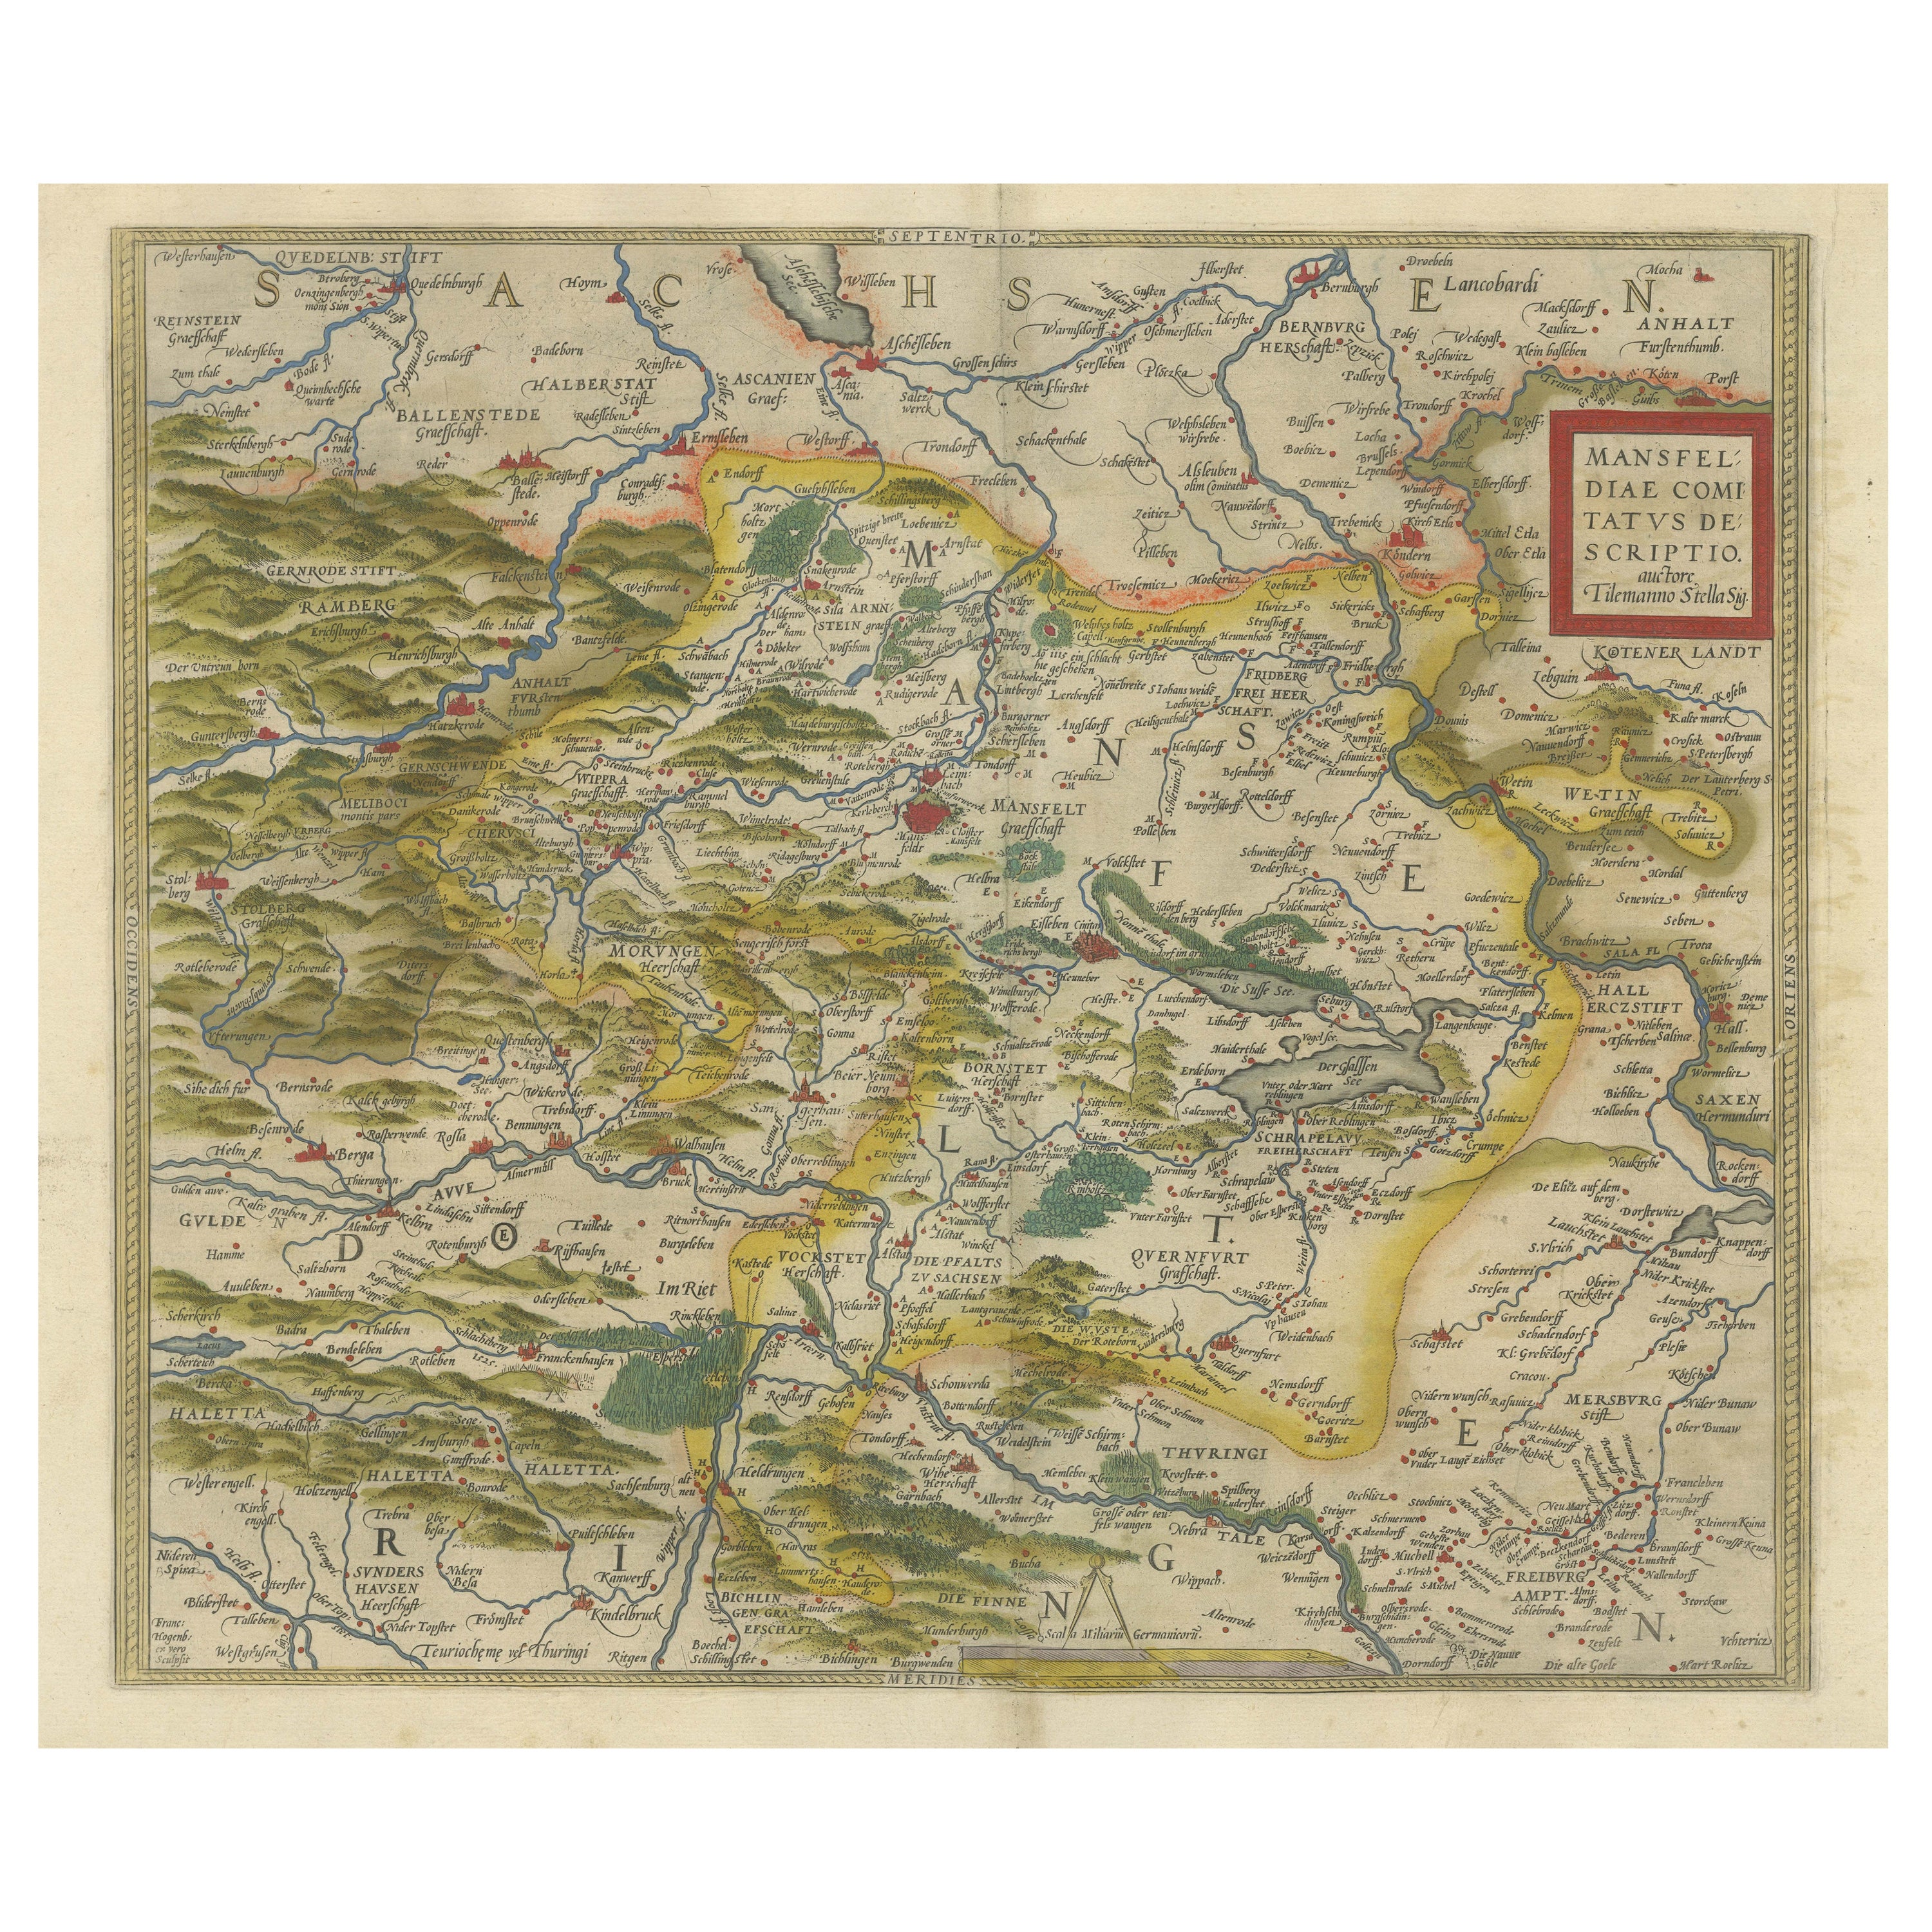 Antique Map of the Region of Mansfeld, Saxony-Anhalt, Germany For Sale